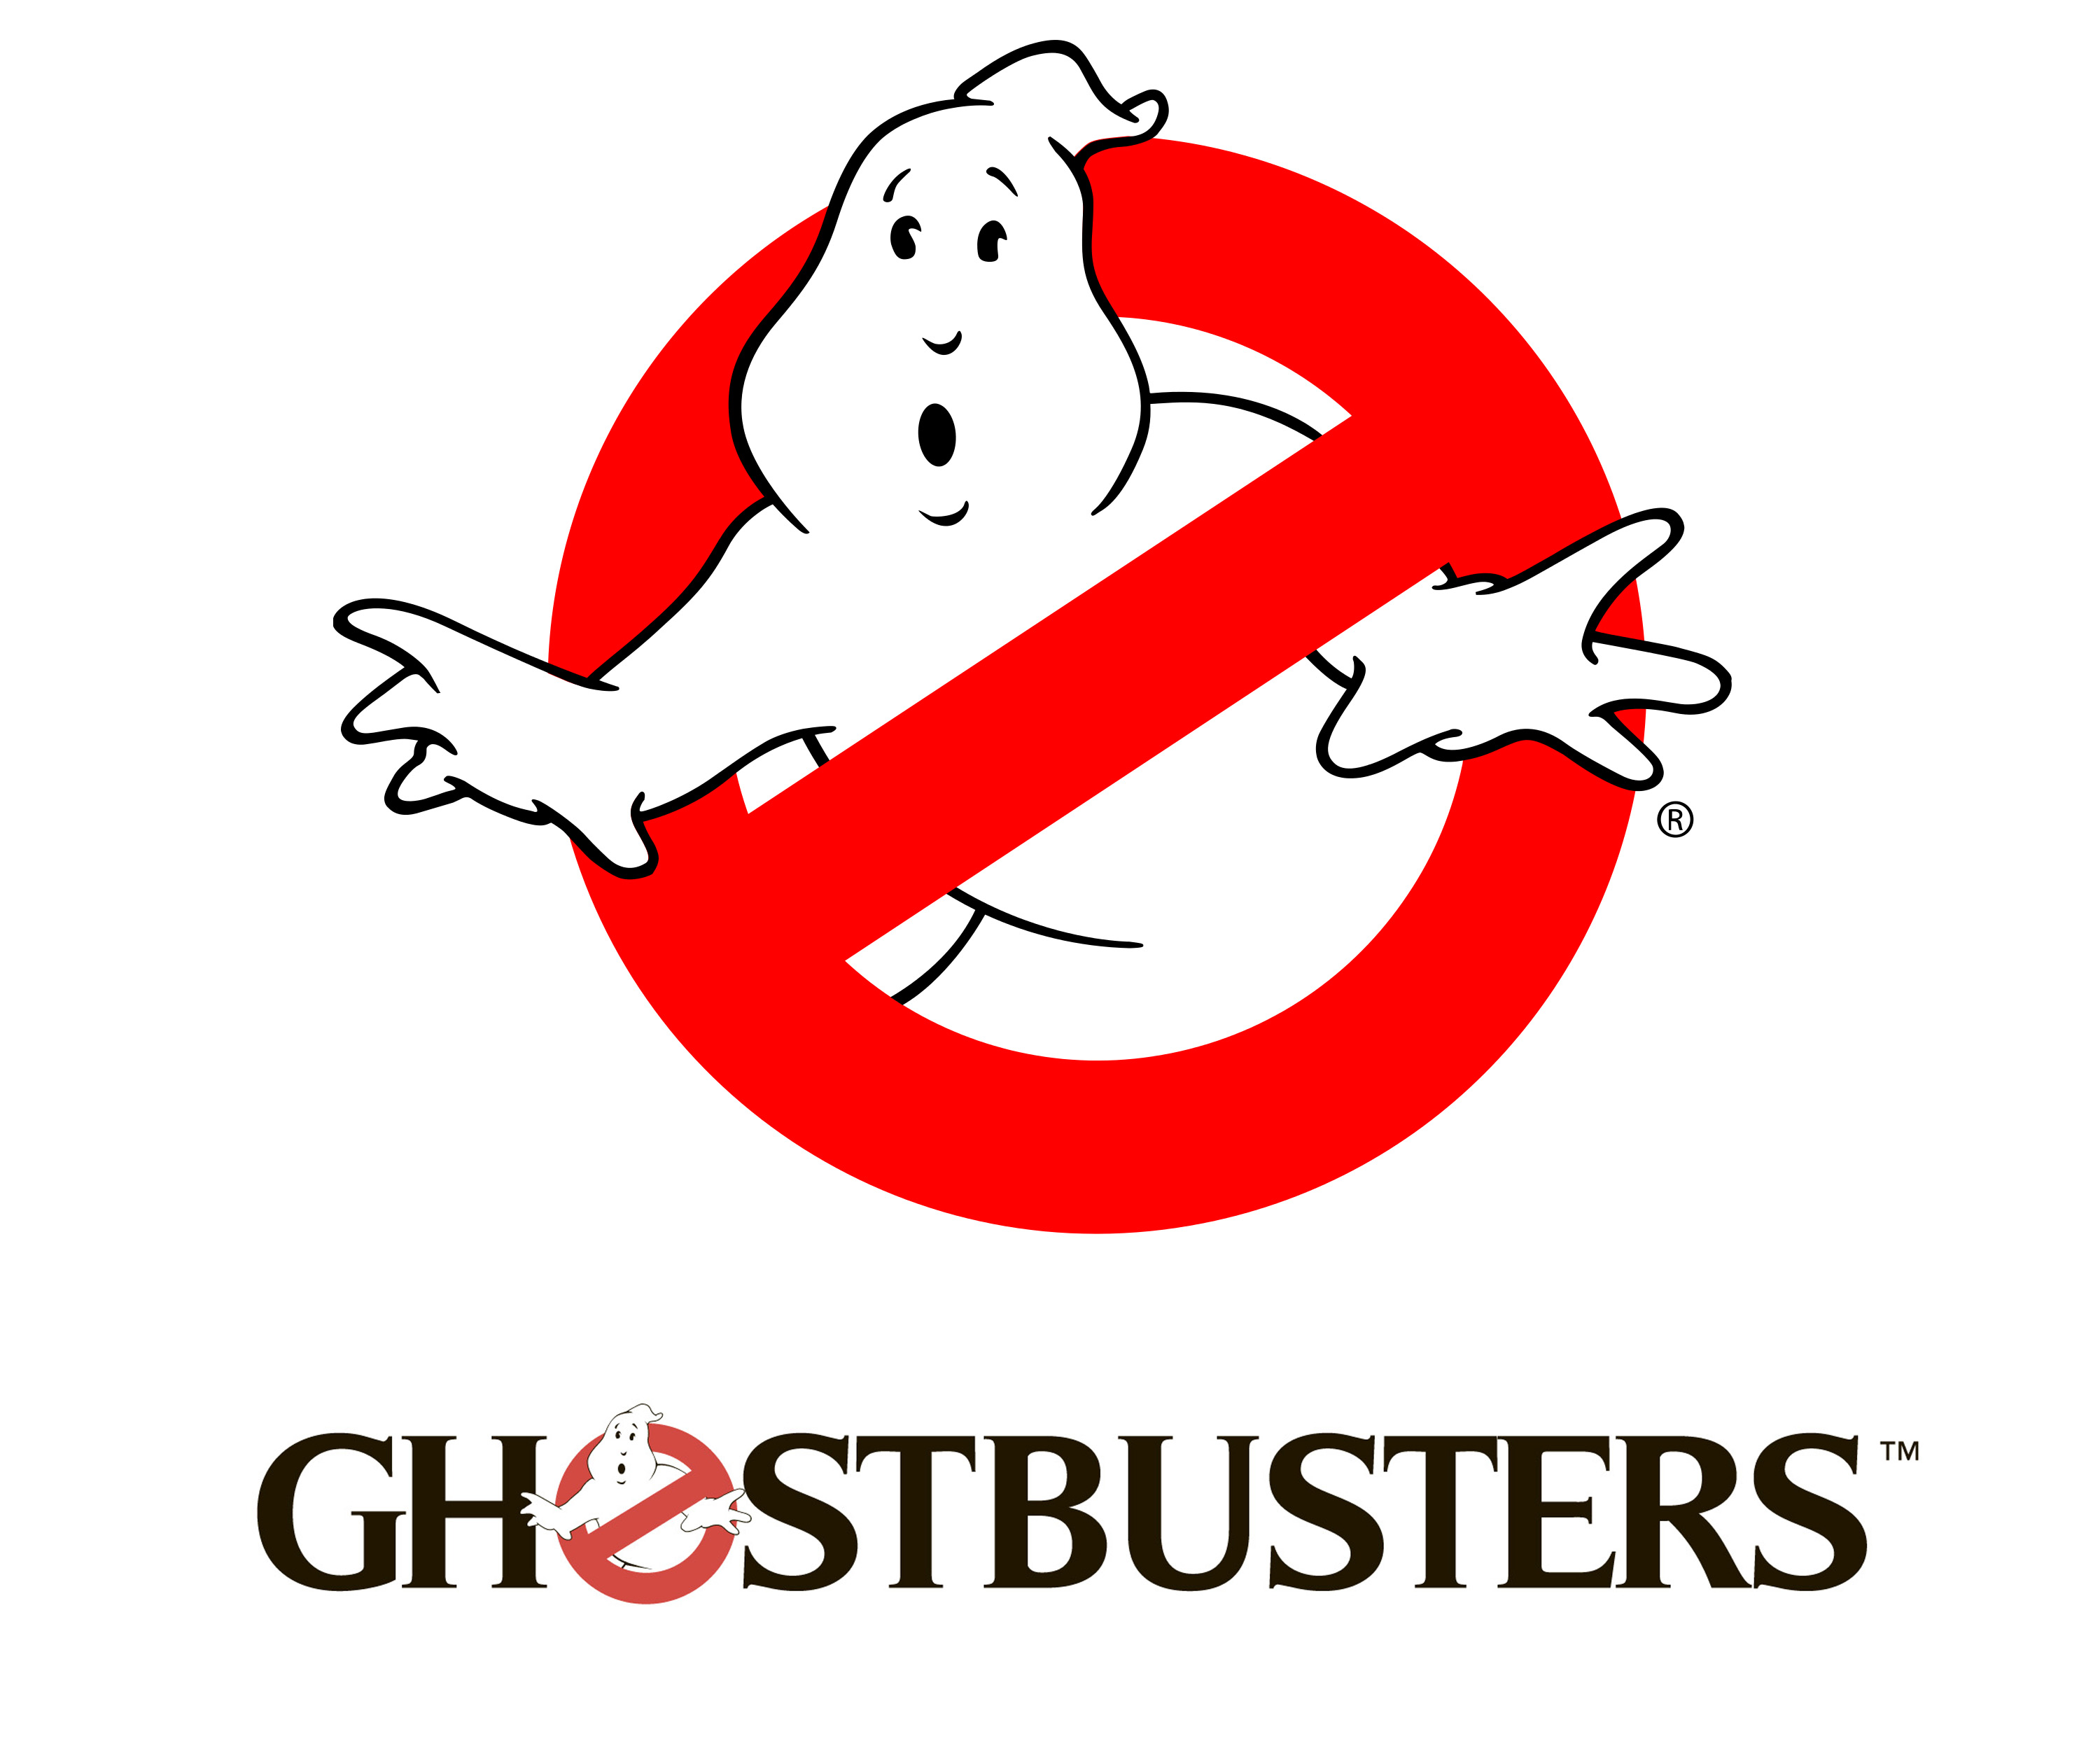 Ghostbusters logo and symbol, meaning, history, PNG